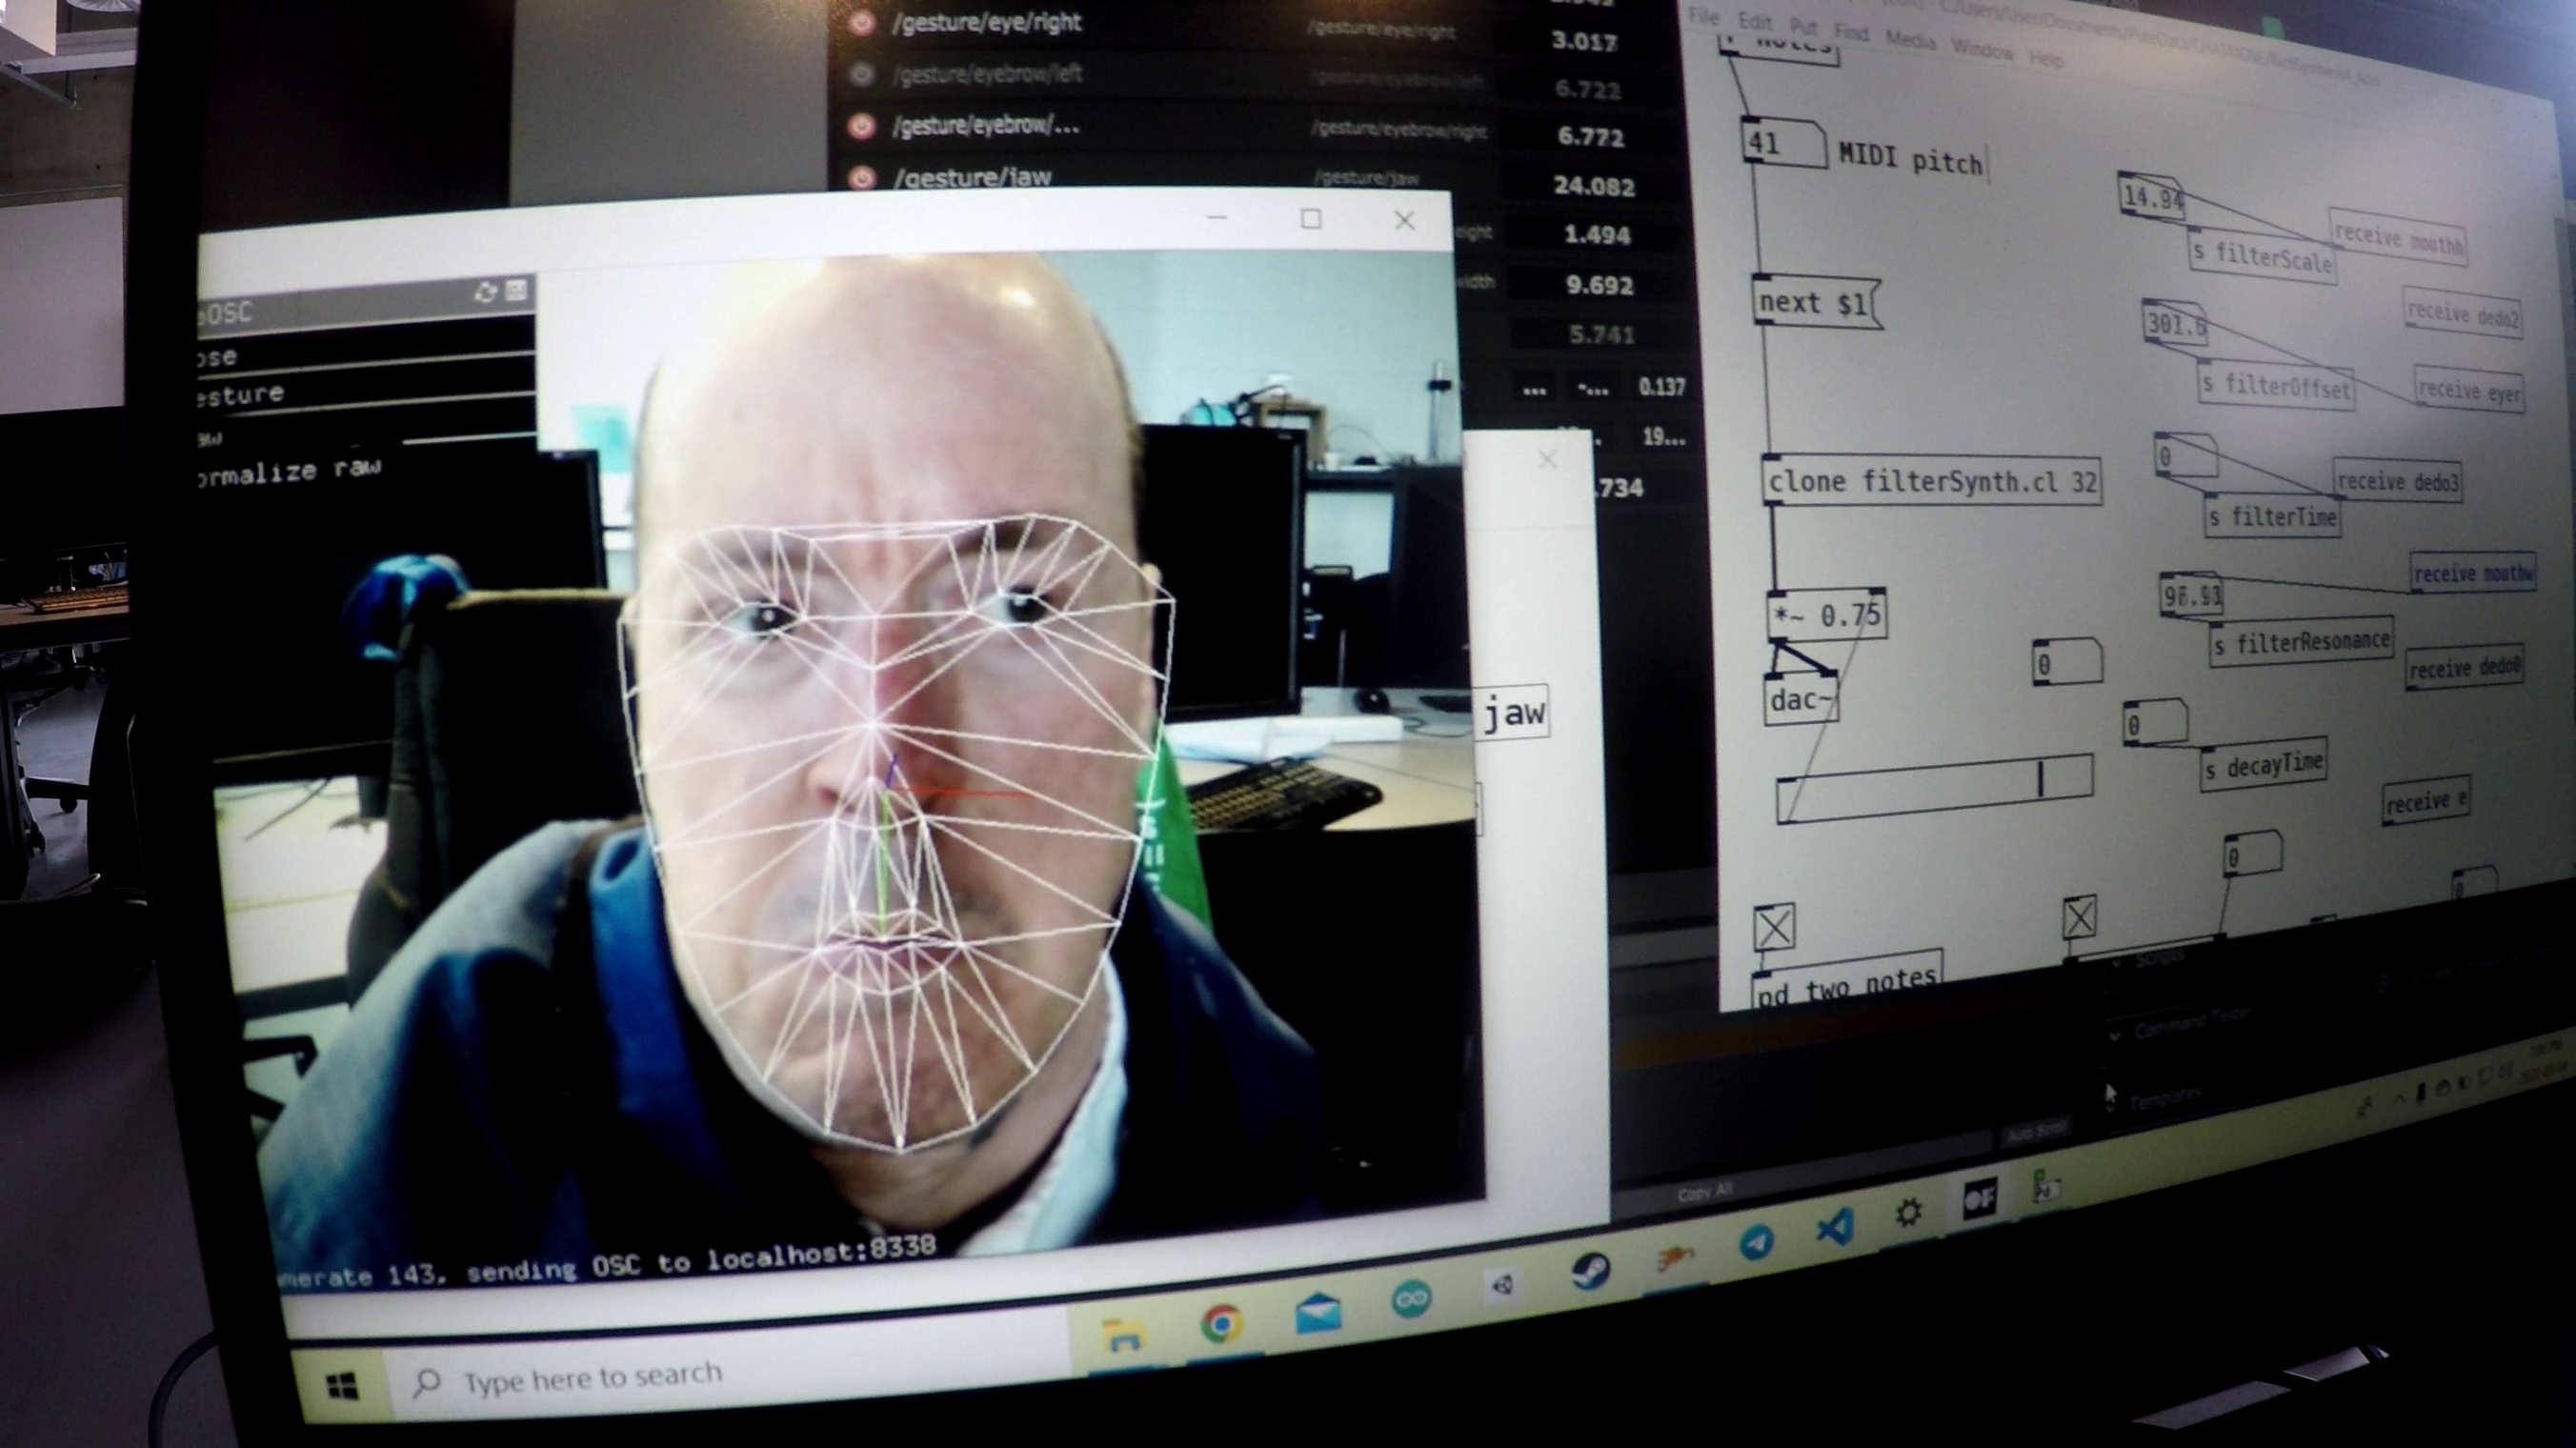 Eric sound music in Pure data with facial gestures